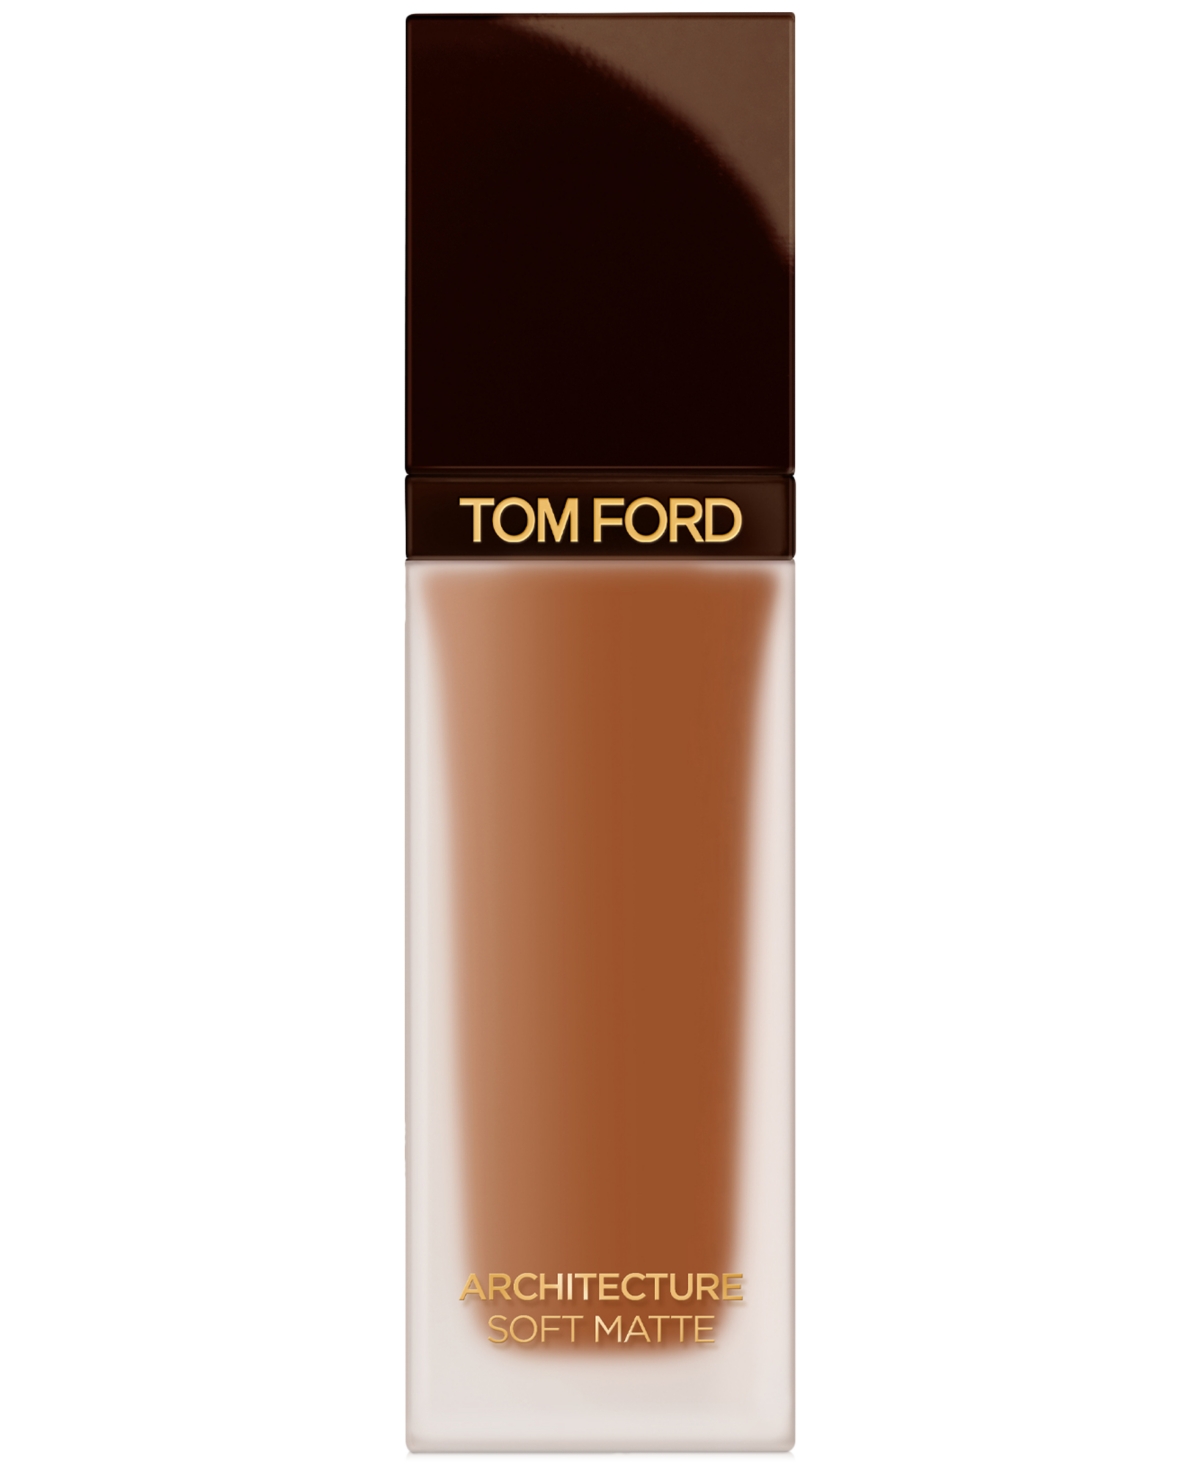 Shop Tom Ford Architecture Soft Matte Blurring Foundation In . Cool Dusk - Deep